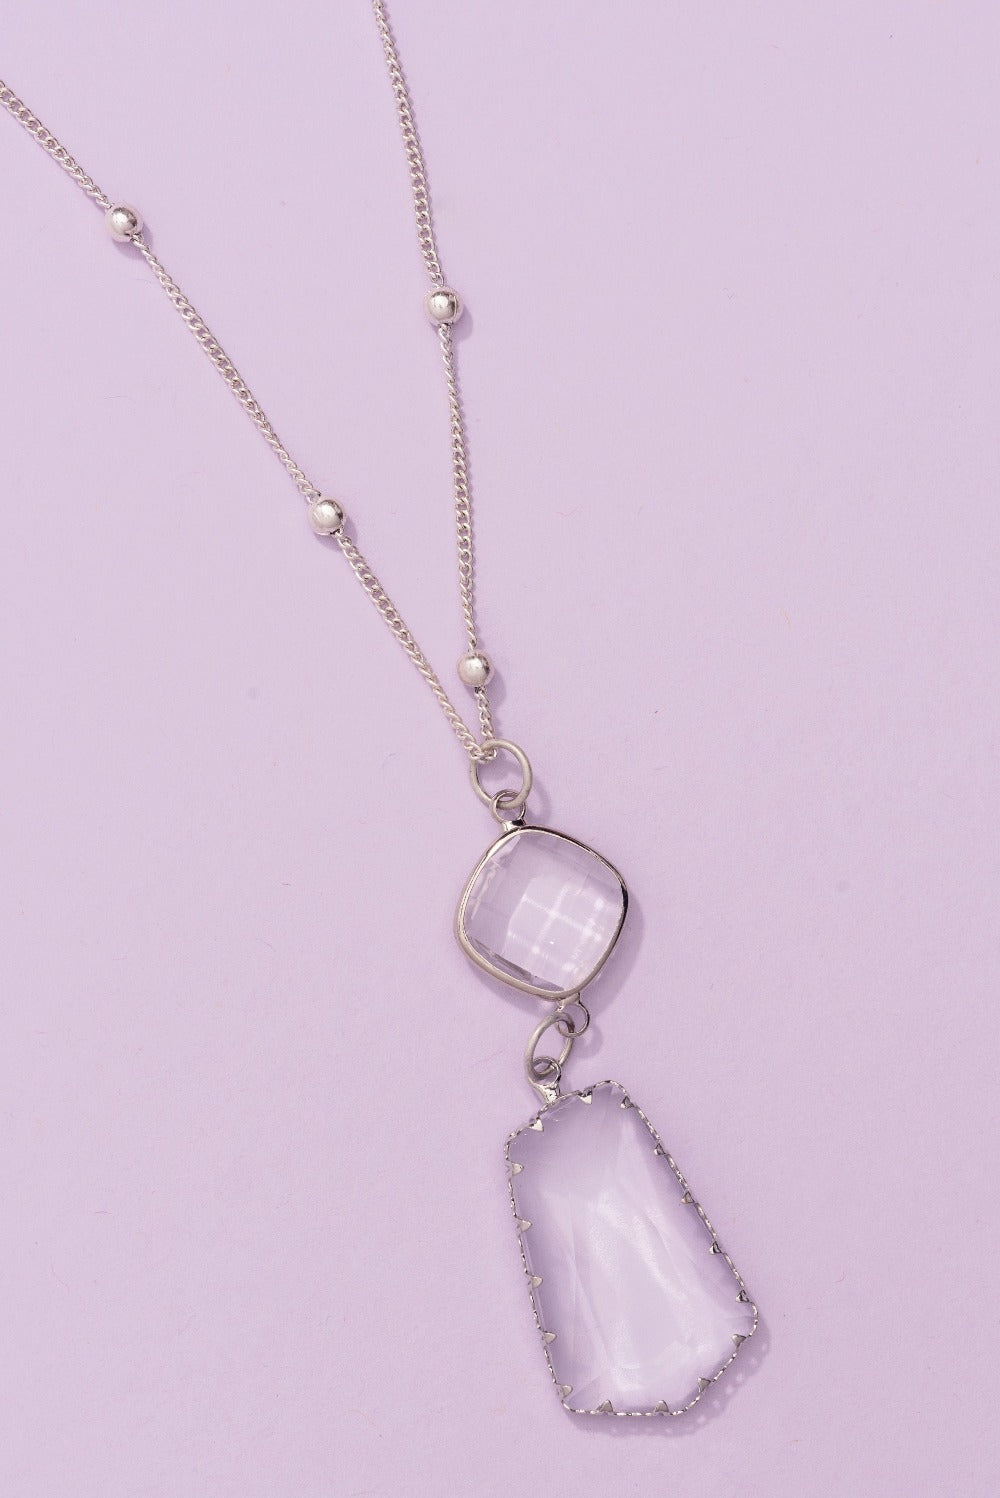 Type 2 Crystal Moonlight Necklace